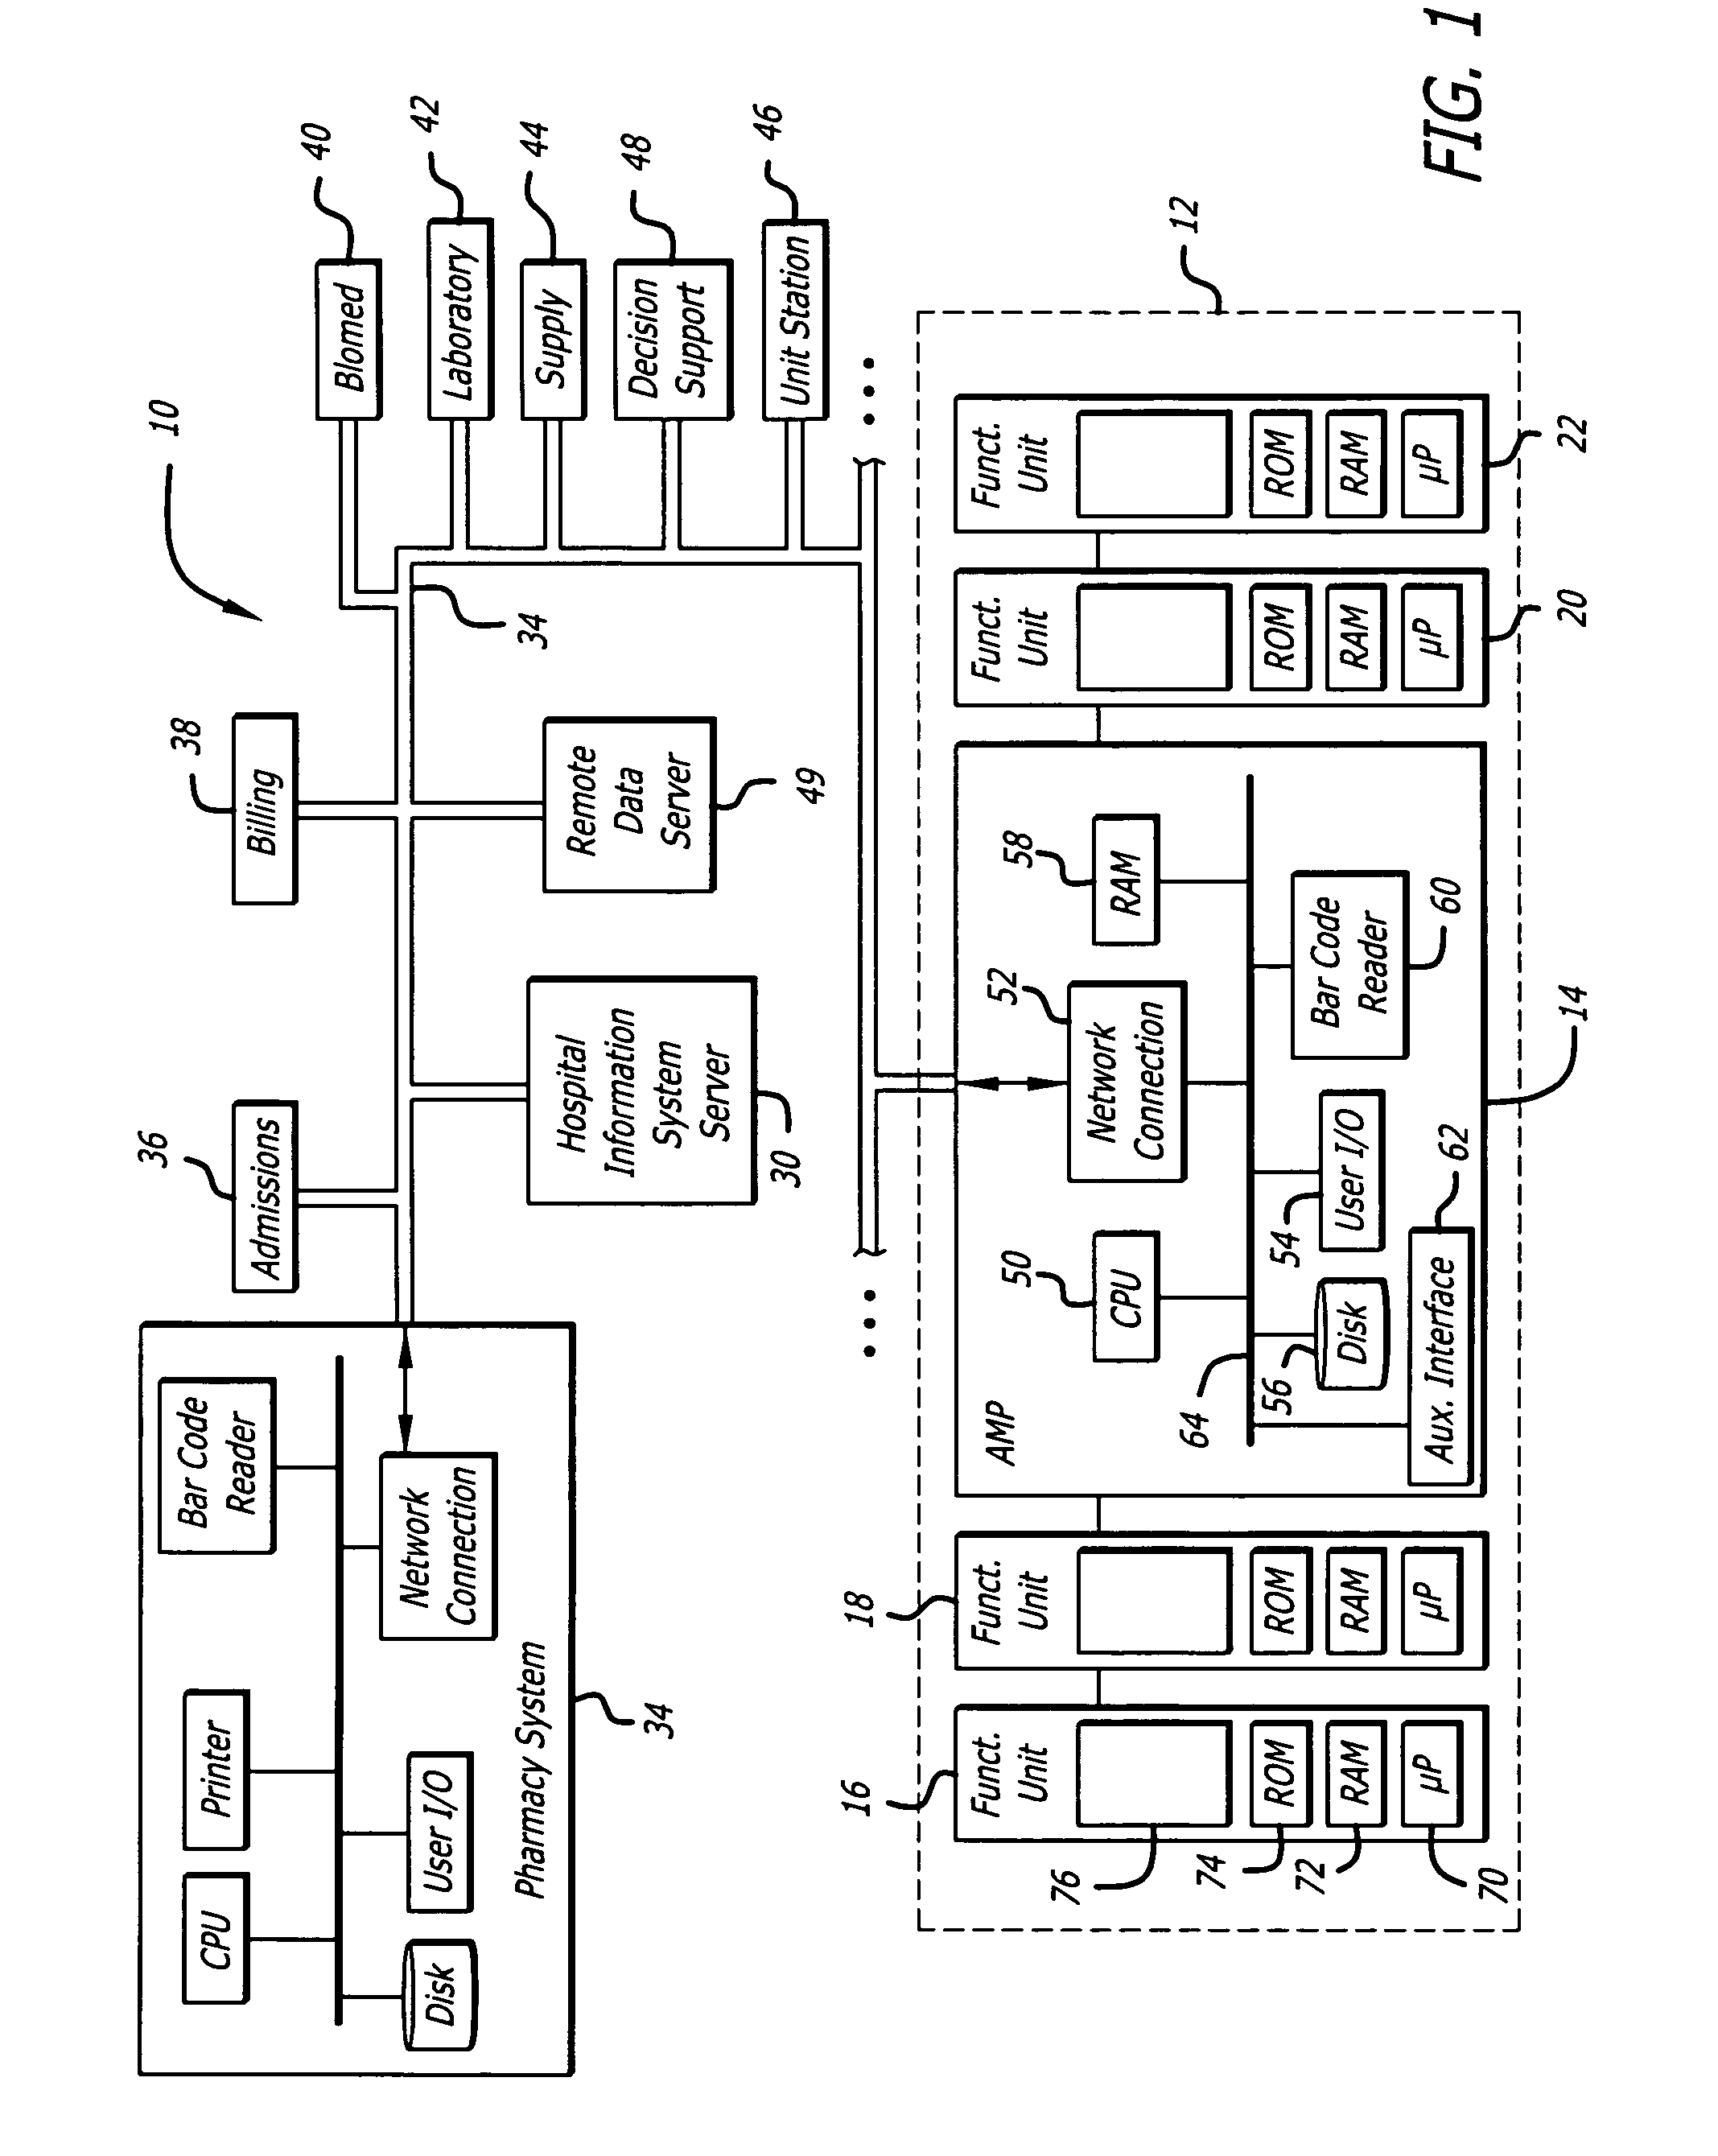 System and method for network monitoring of multiple medical devices